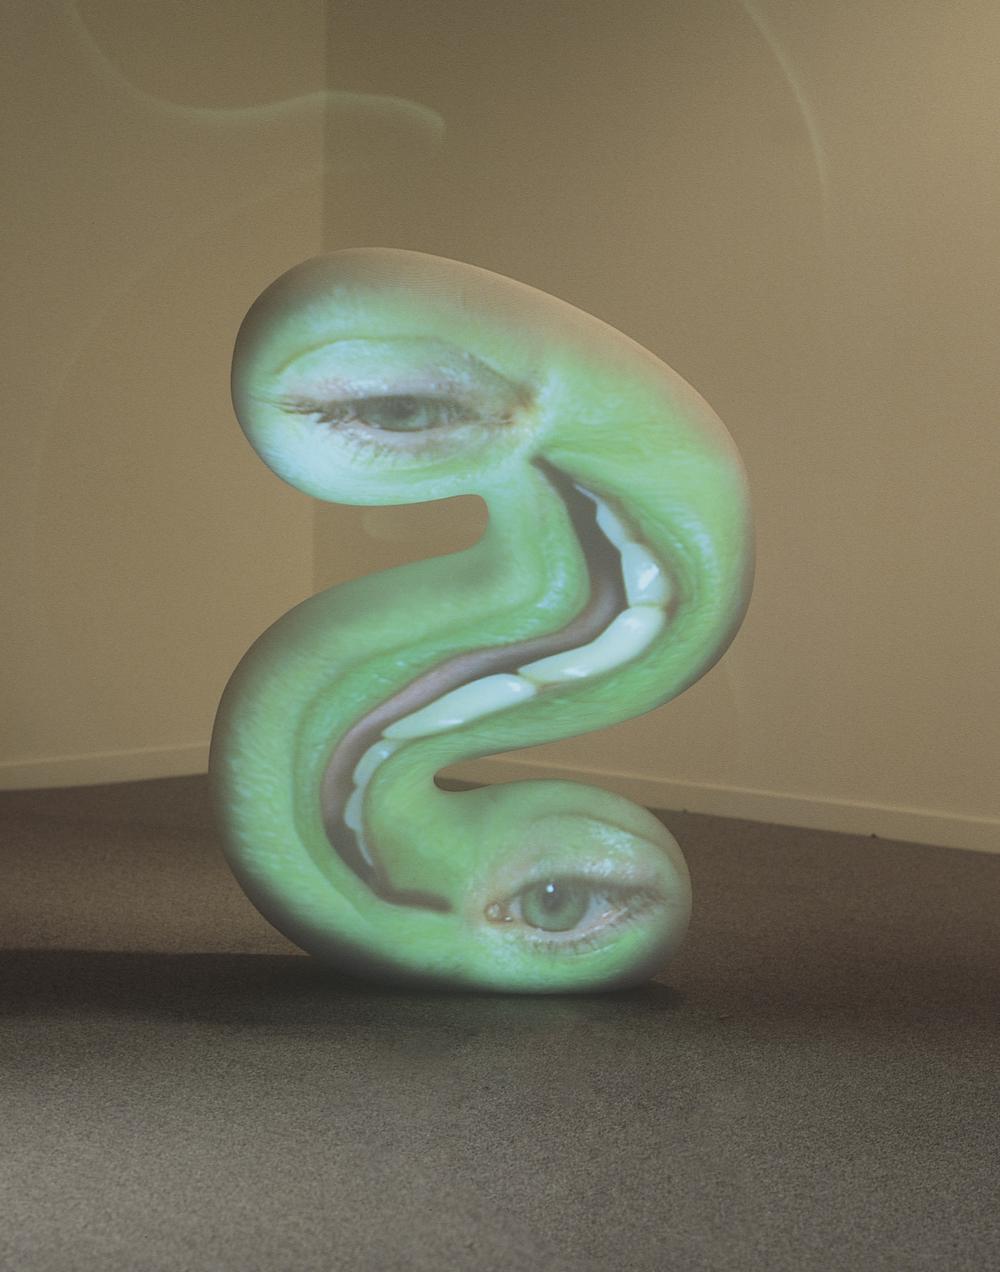 backwards s shaped sculpture with two eyes and mouth distorted to the s shape by using projection